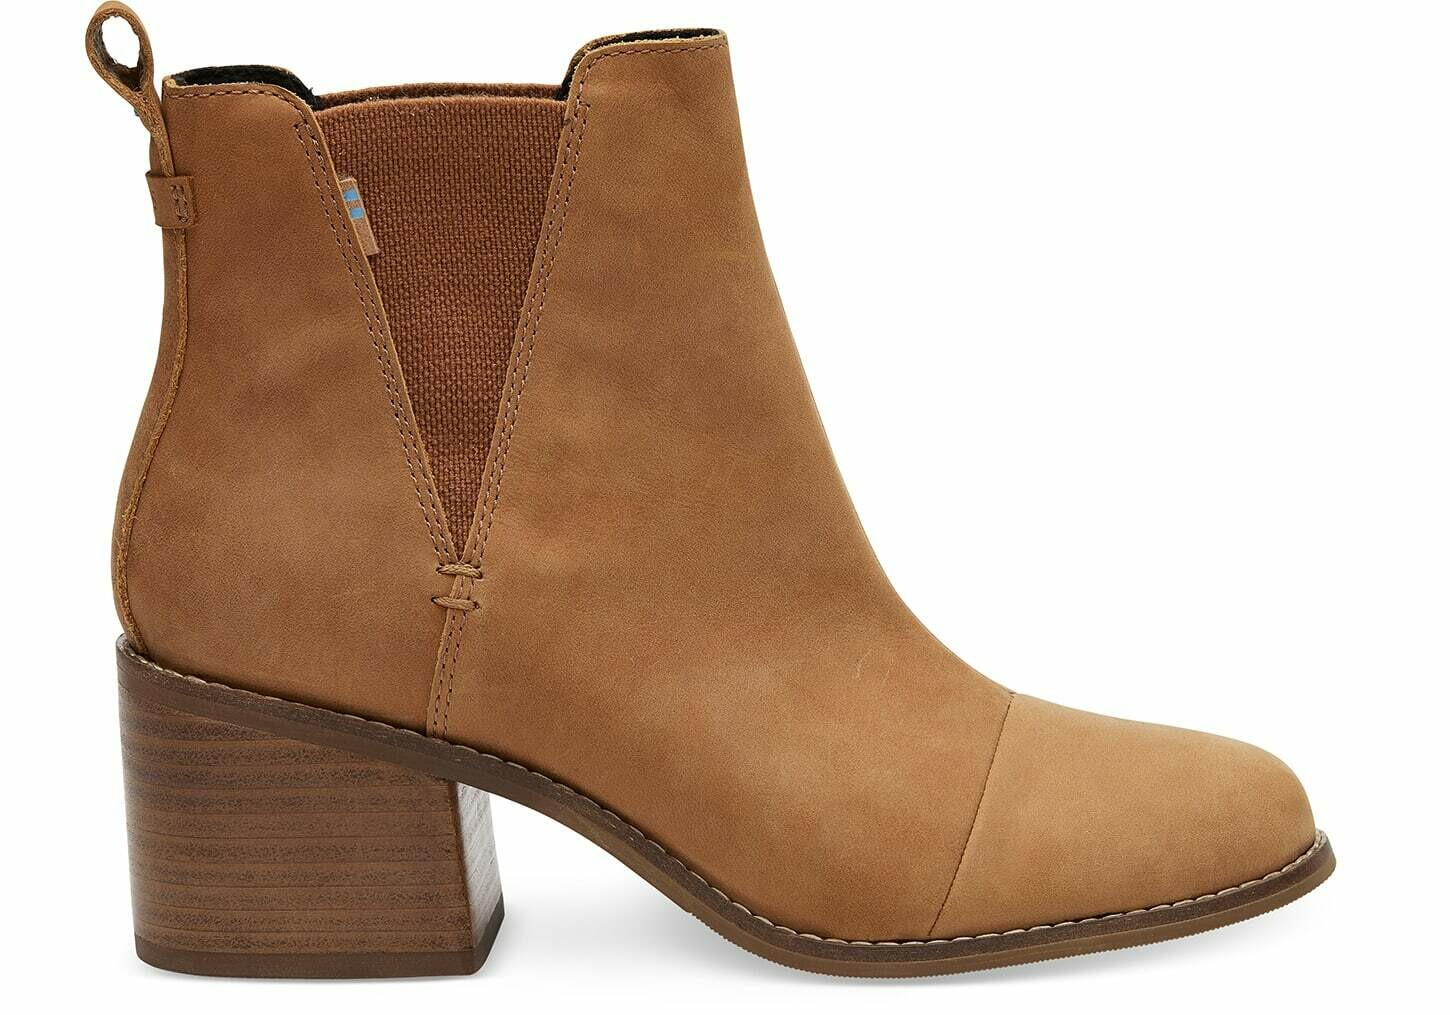 Toms Women's Esme Leather Boot